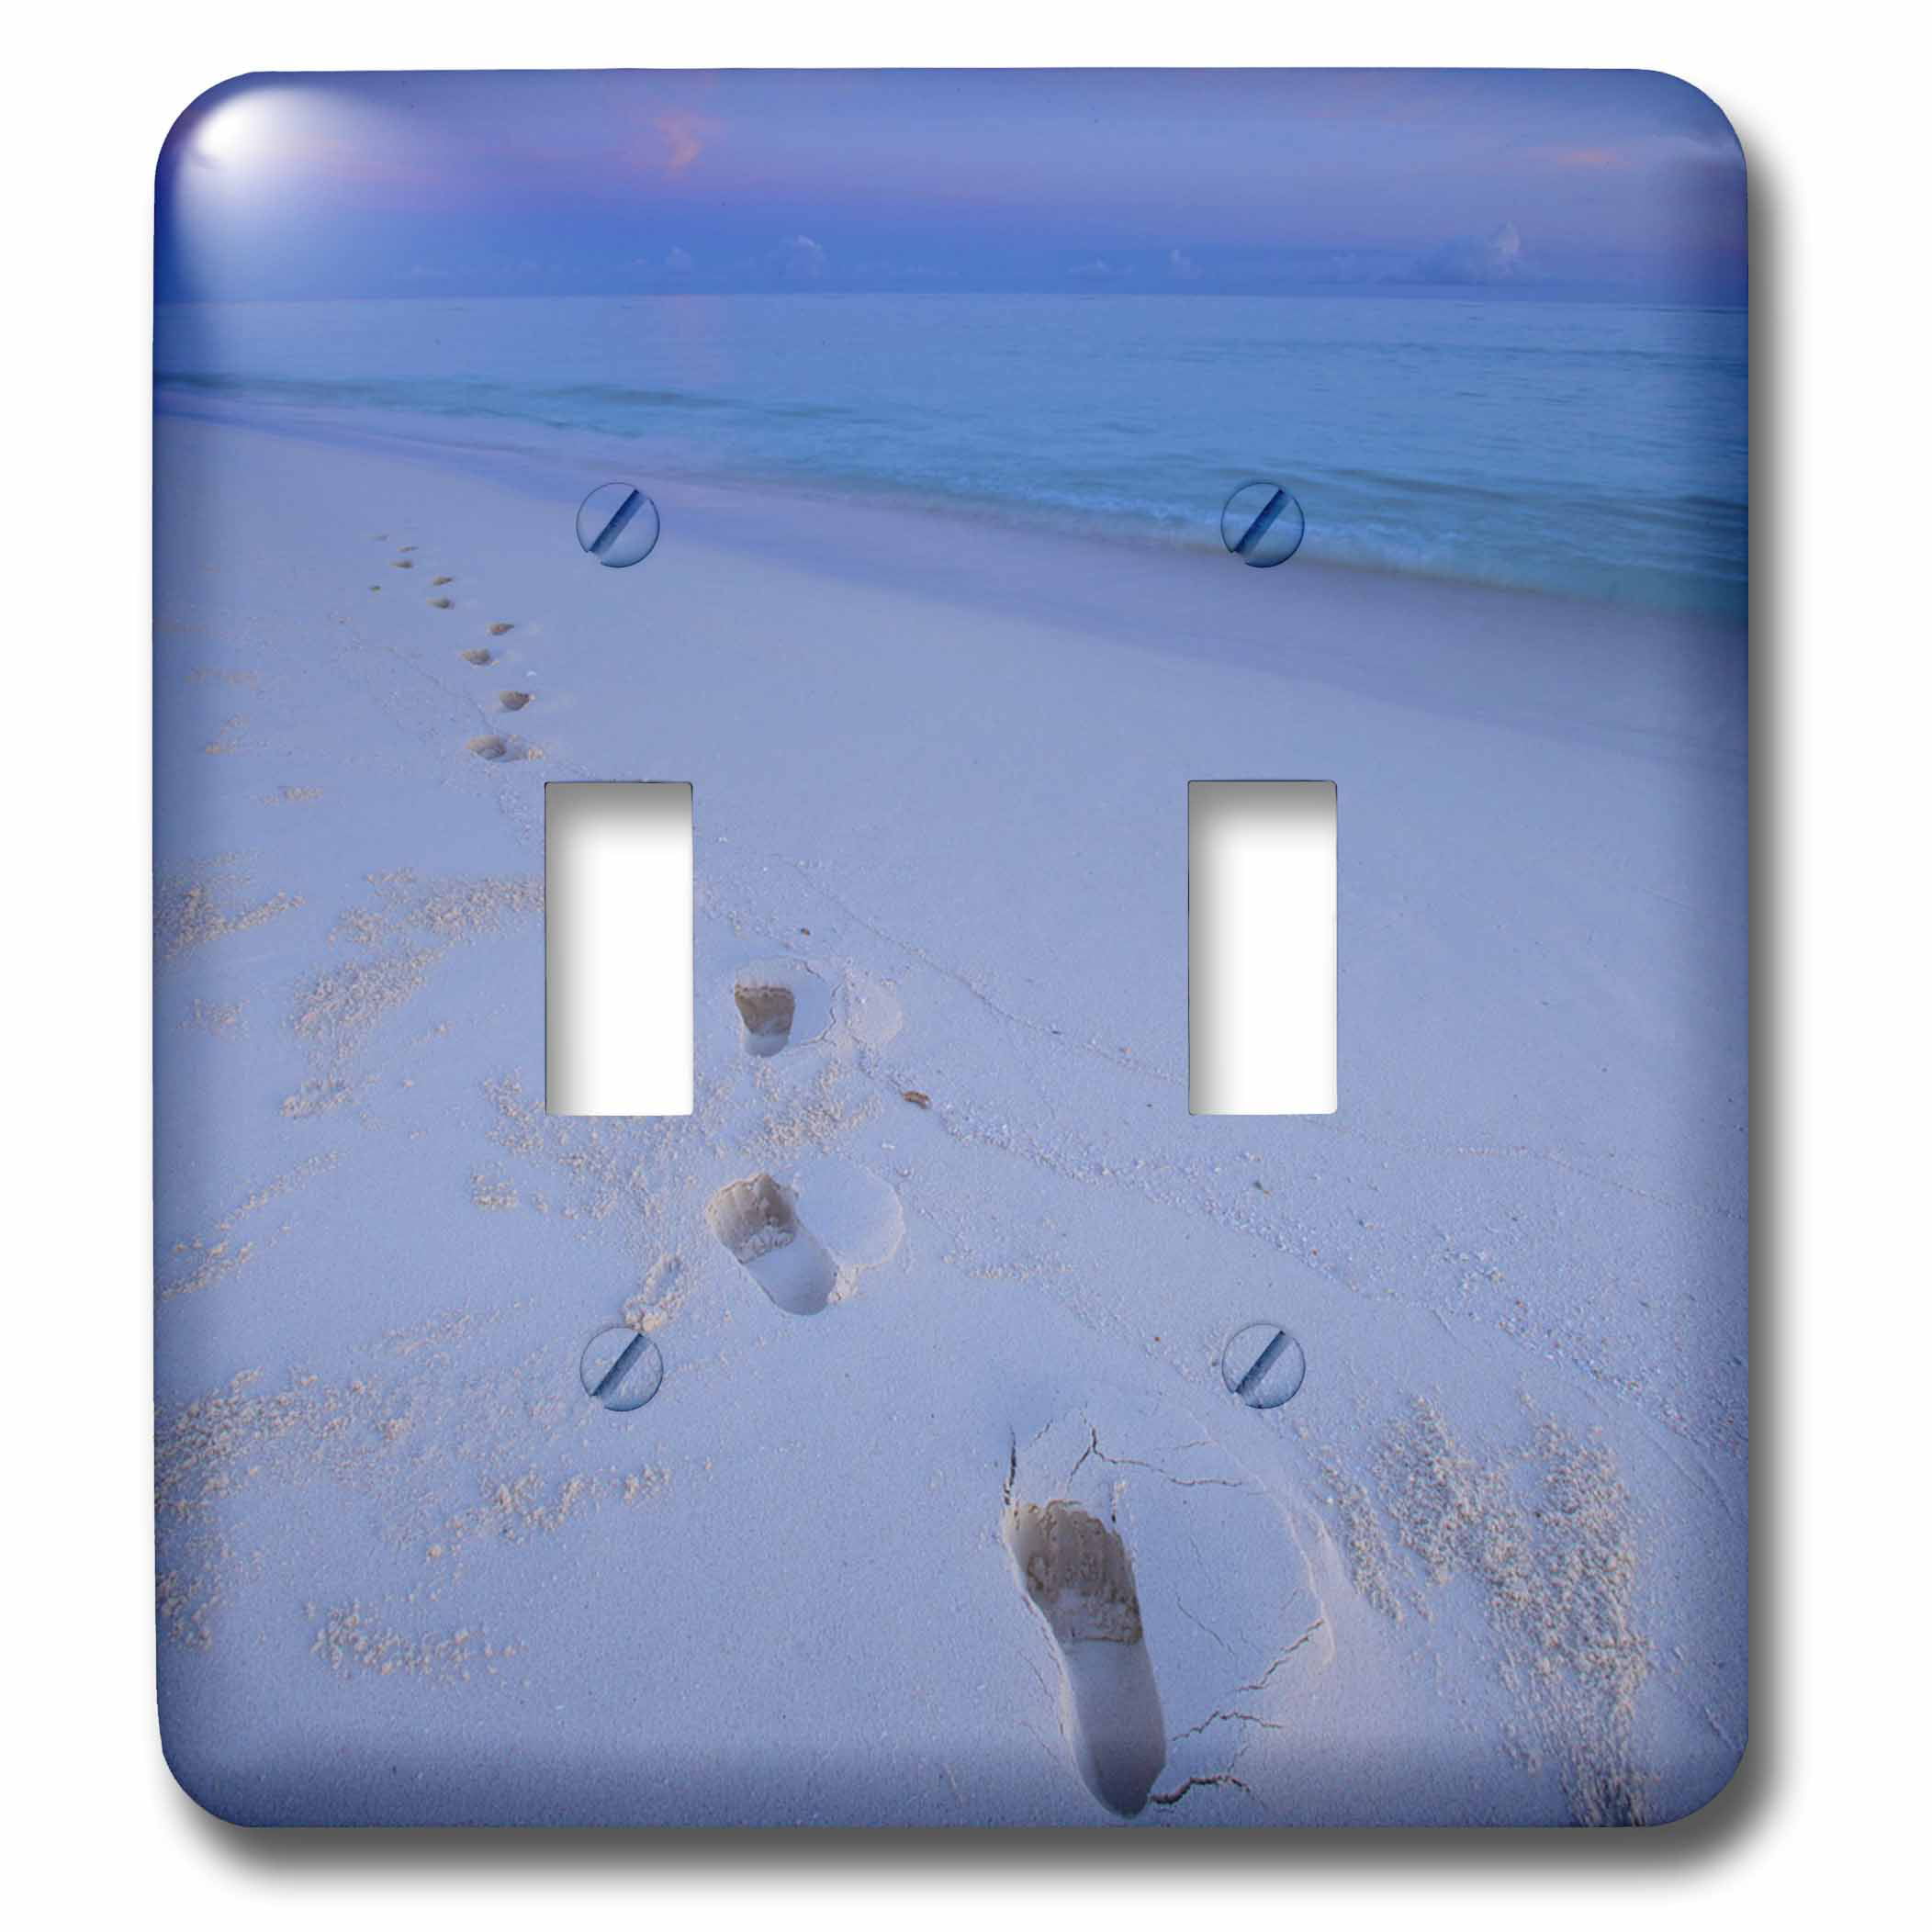 Multi-Color 3dRose lsp_35257_2 Tan Horseshoe Crab On Beach Toggle Switch 